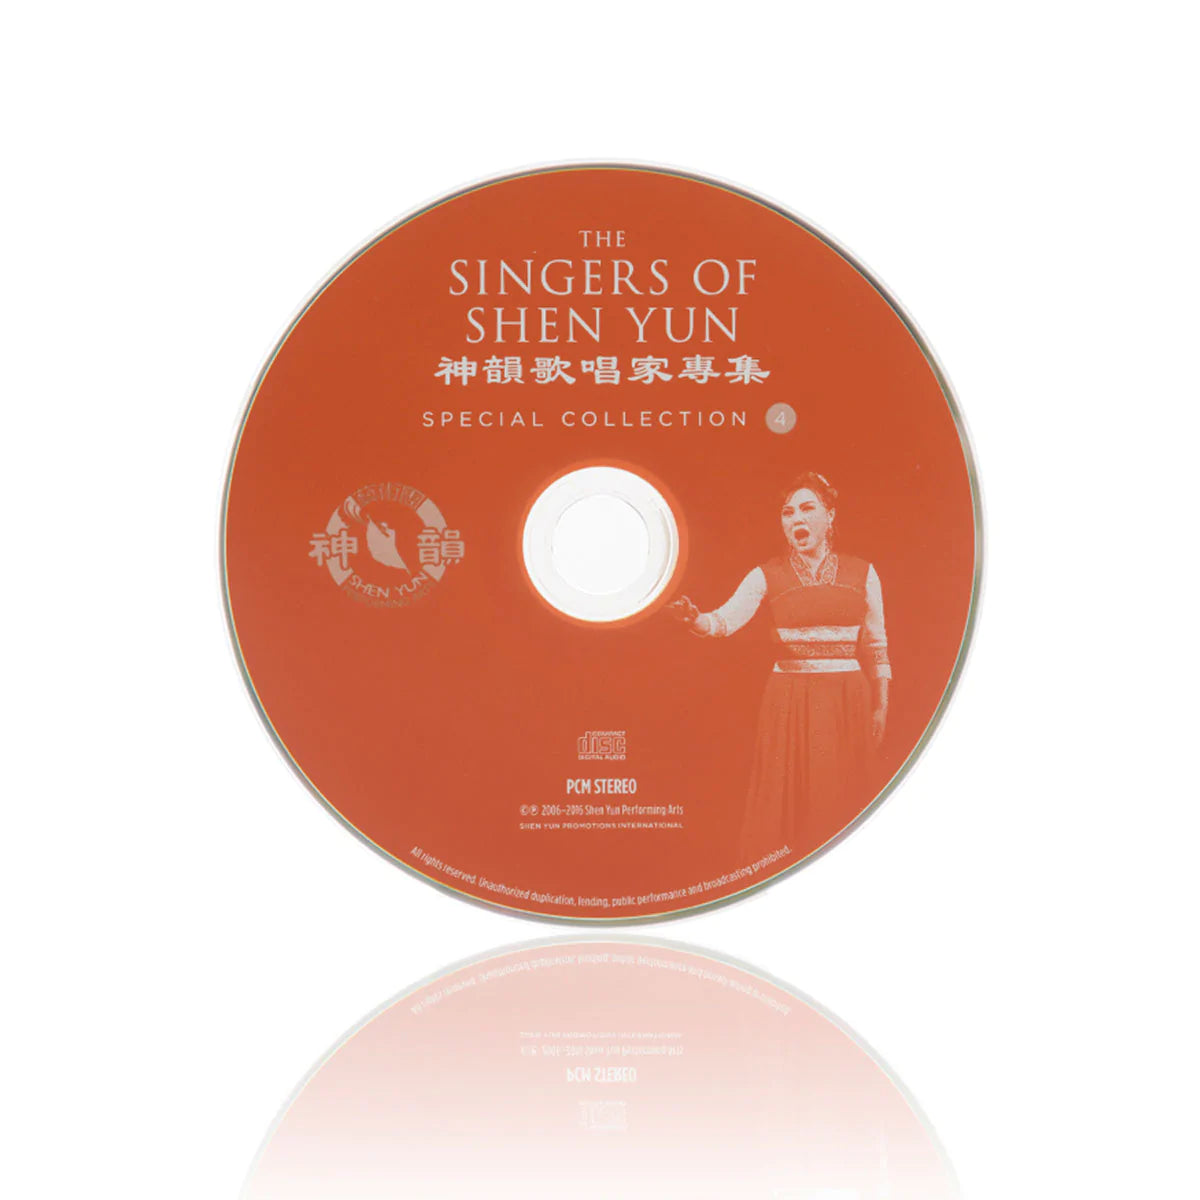 The Singers of Shen Yun: Special Collection - No. 4